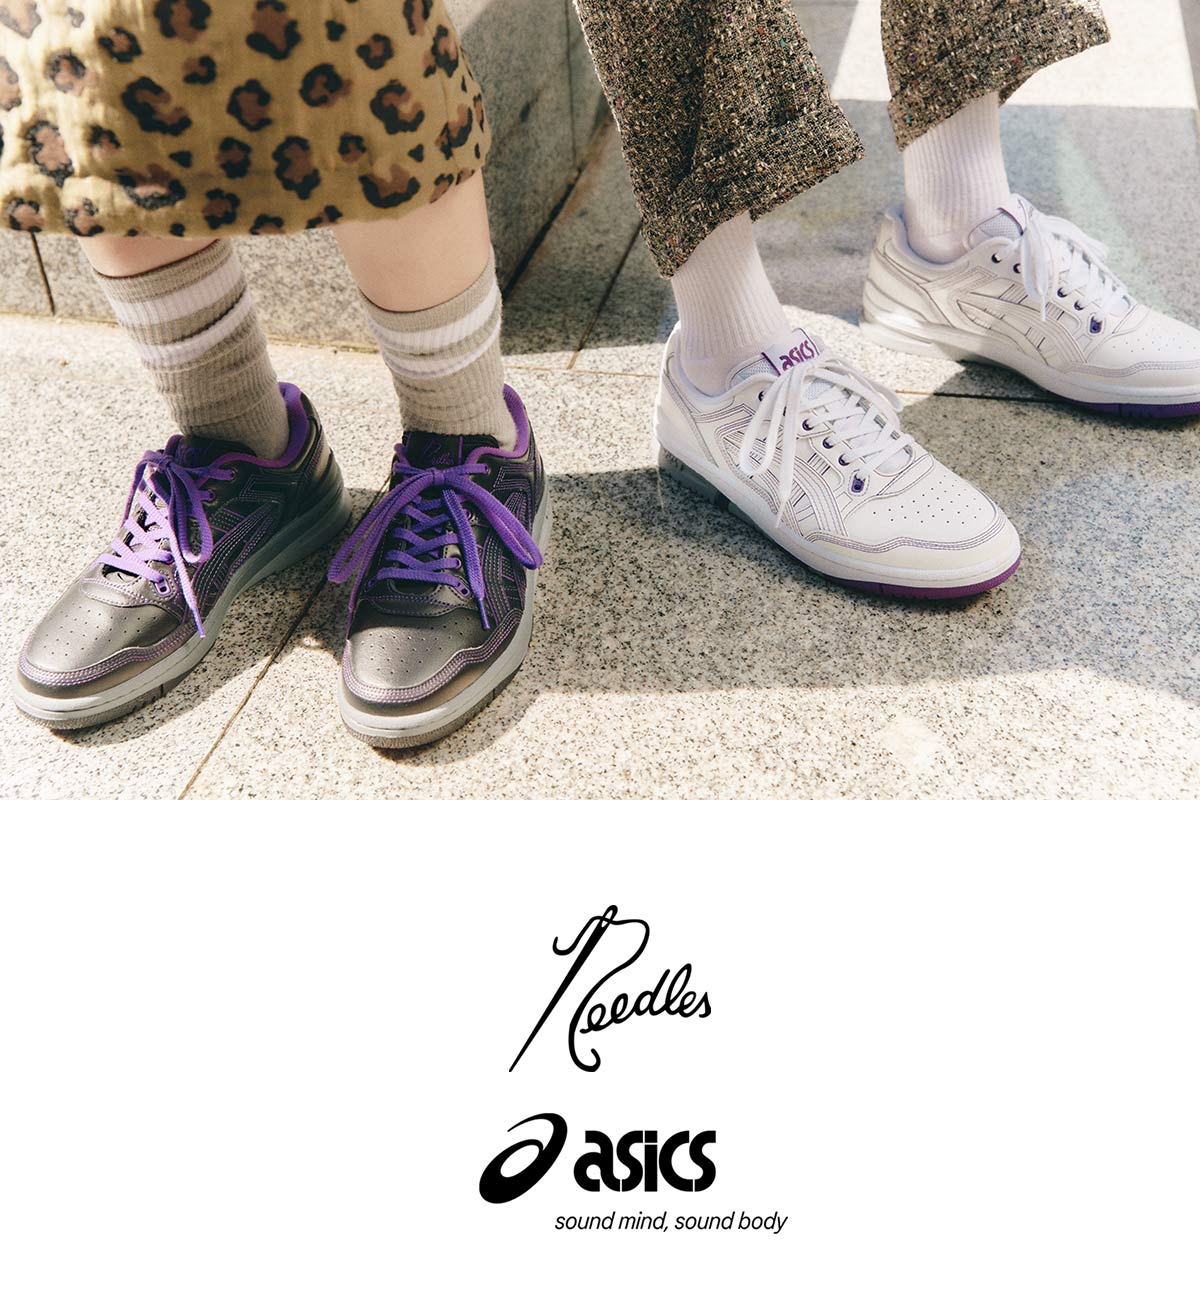 〈NEEDLES〉x〈ASICS〉COLLABORATION PRODUCTS Releasing on 9/30（sat）11:00 JST